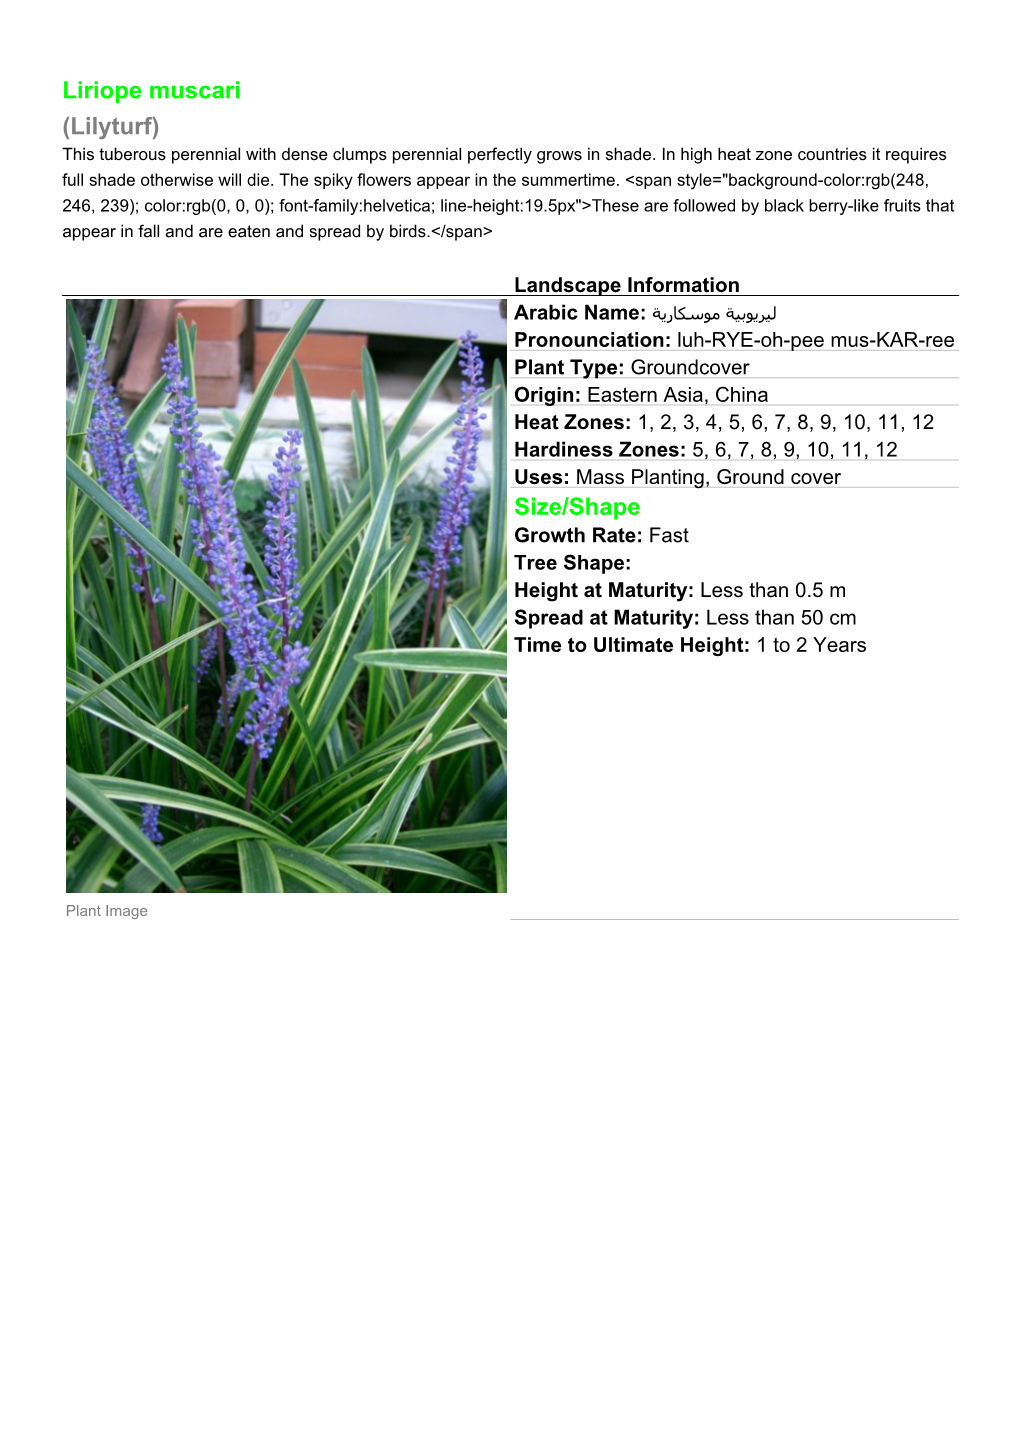 Liriope Muscari (Lilyturf) This Tuberous Perennial with Dense Clumps Perennial Perfectly Grows in Shade